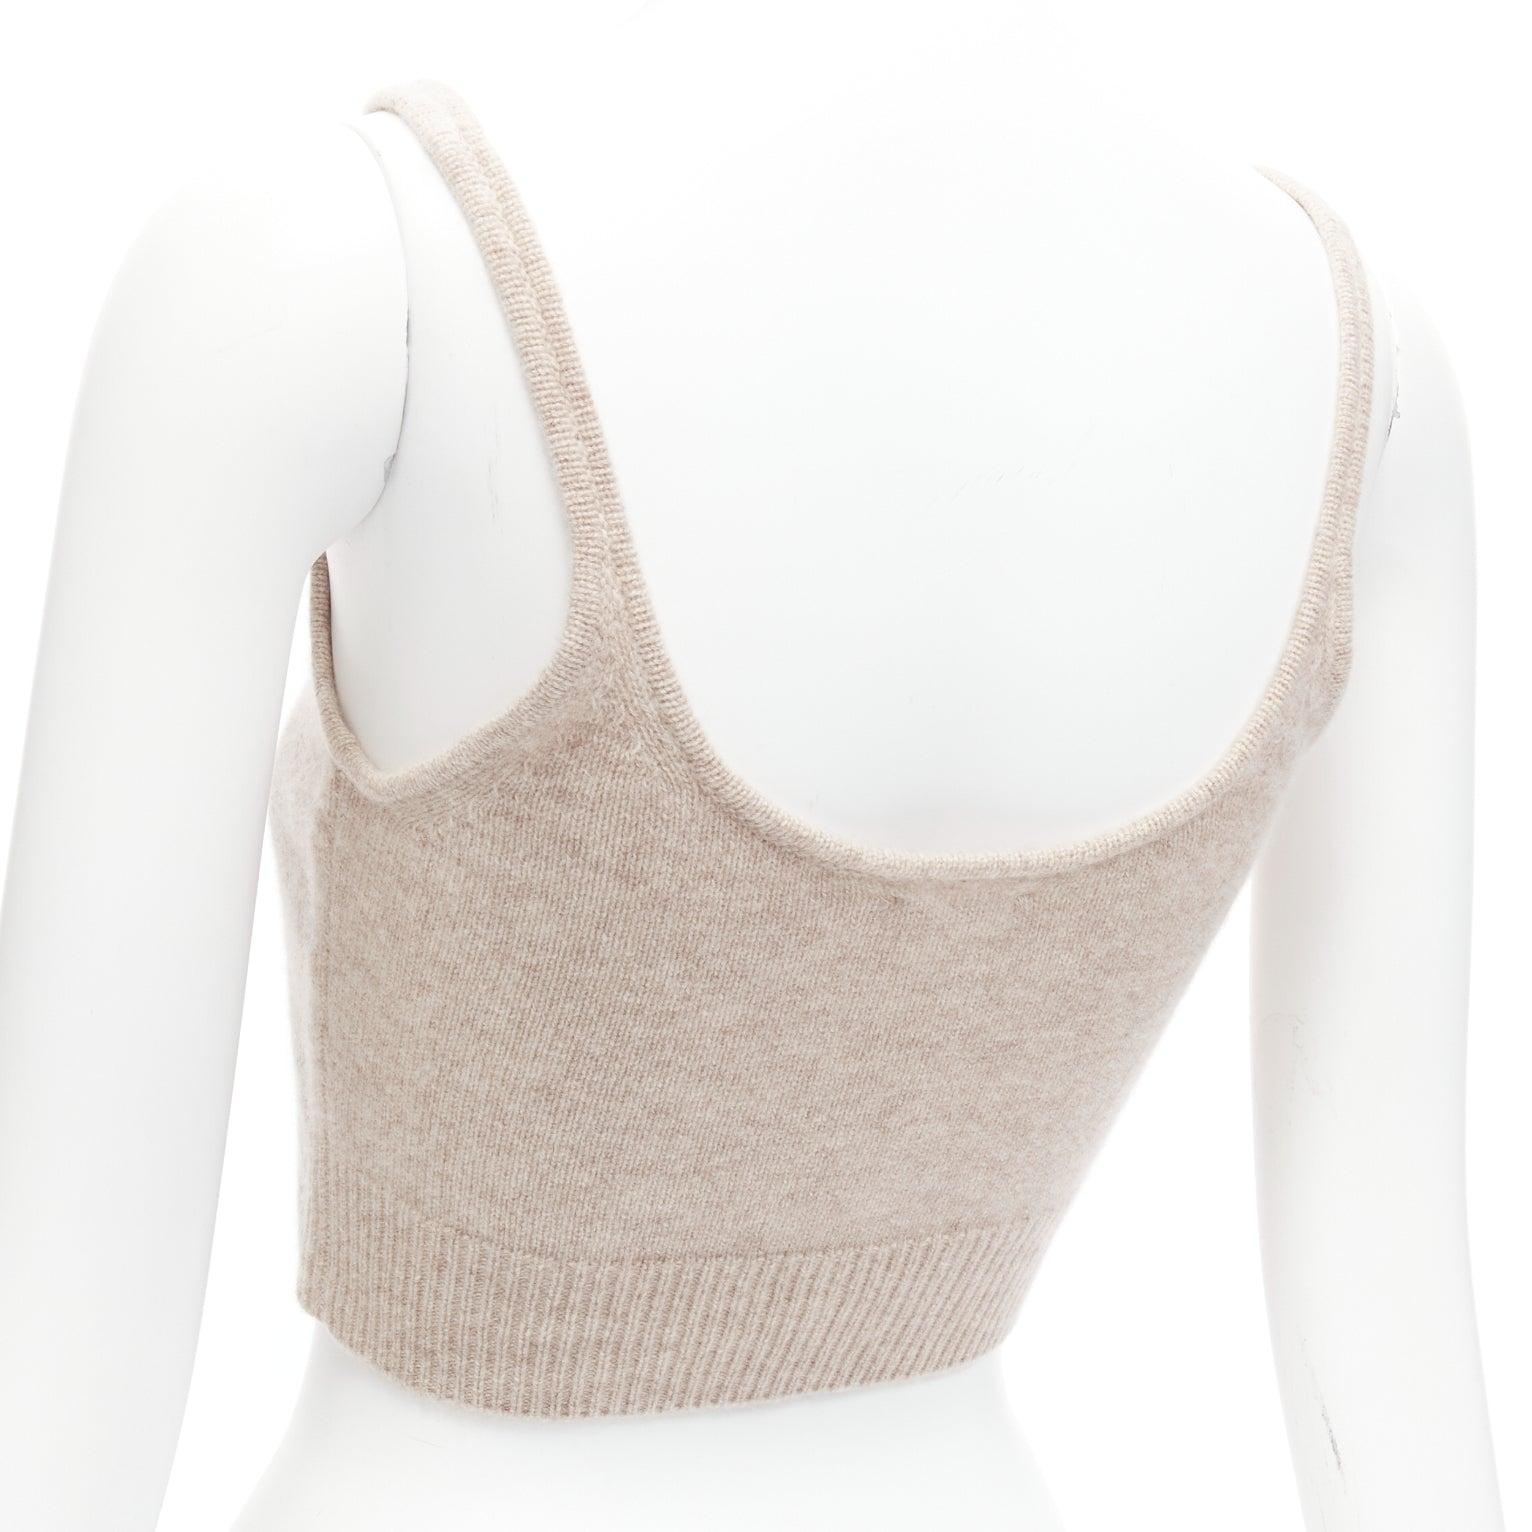 REFORMATION Varenne 100% recycled cashmere scoop neck cropped tank top XS
Reference: SNKO/A00397
Brand: Reformation
Material: Cashmere
Color: Beige
Pattern: Solid
Closure: Pullover
Extra Details: 70% recycled cashmere, 30% cashmere.
Made in: